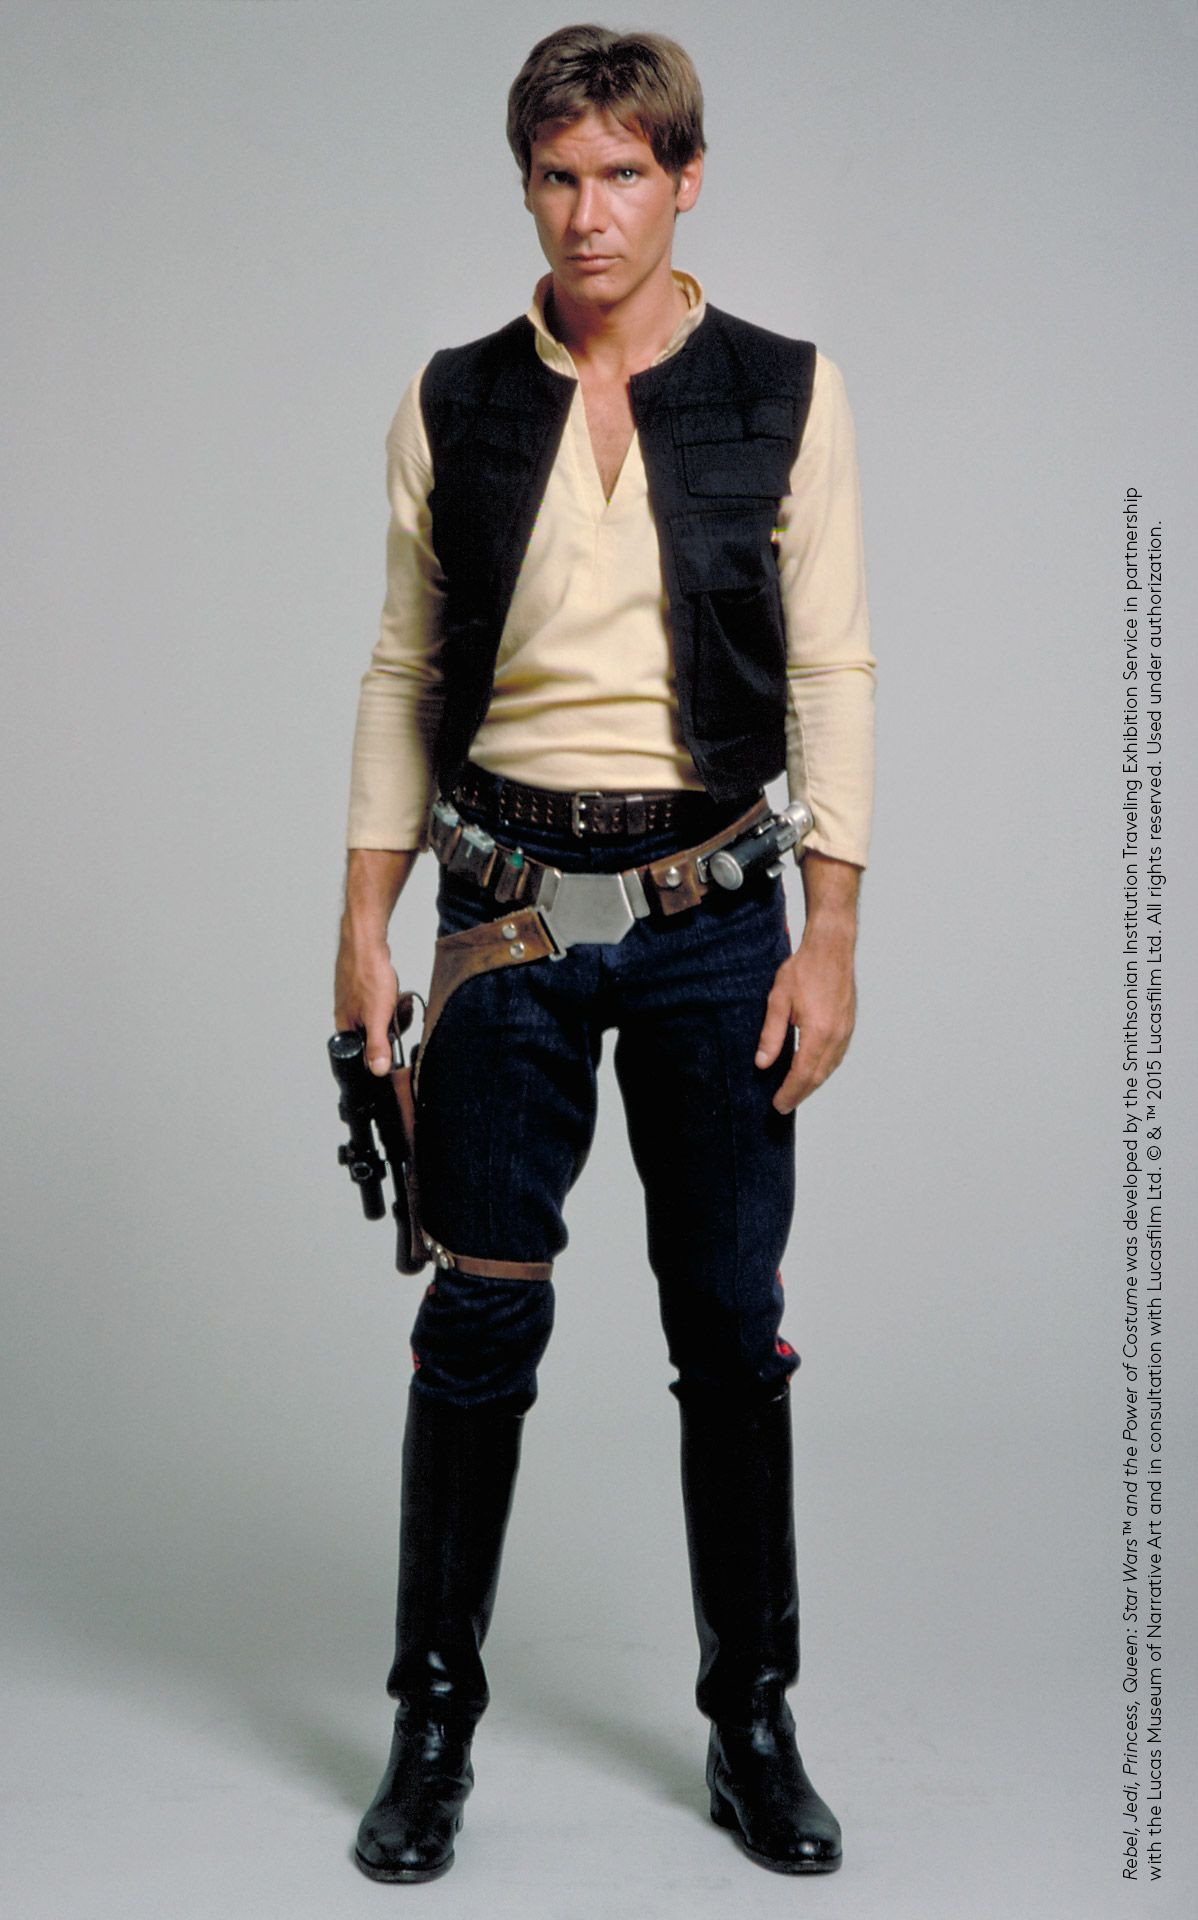 Han Solo DIY Costume
 Inspiration for Han Solo’s gun belt was drawn from